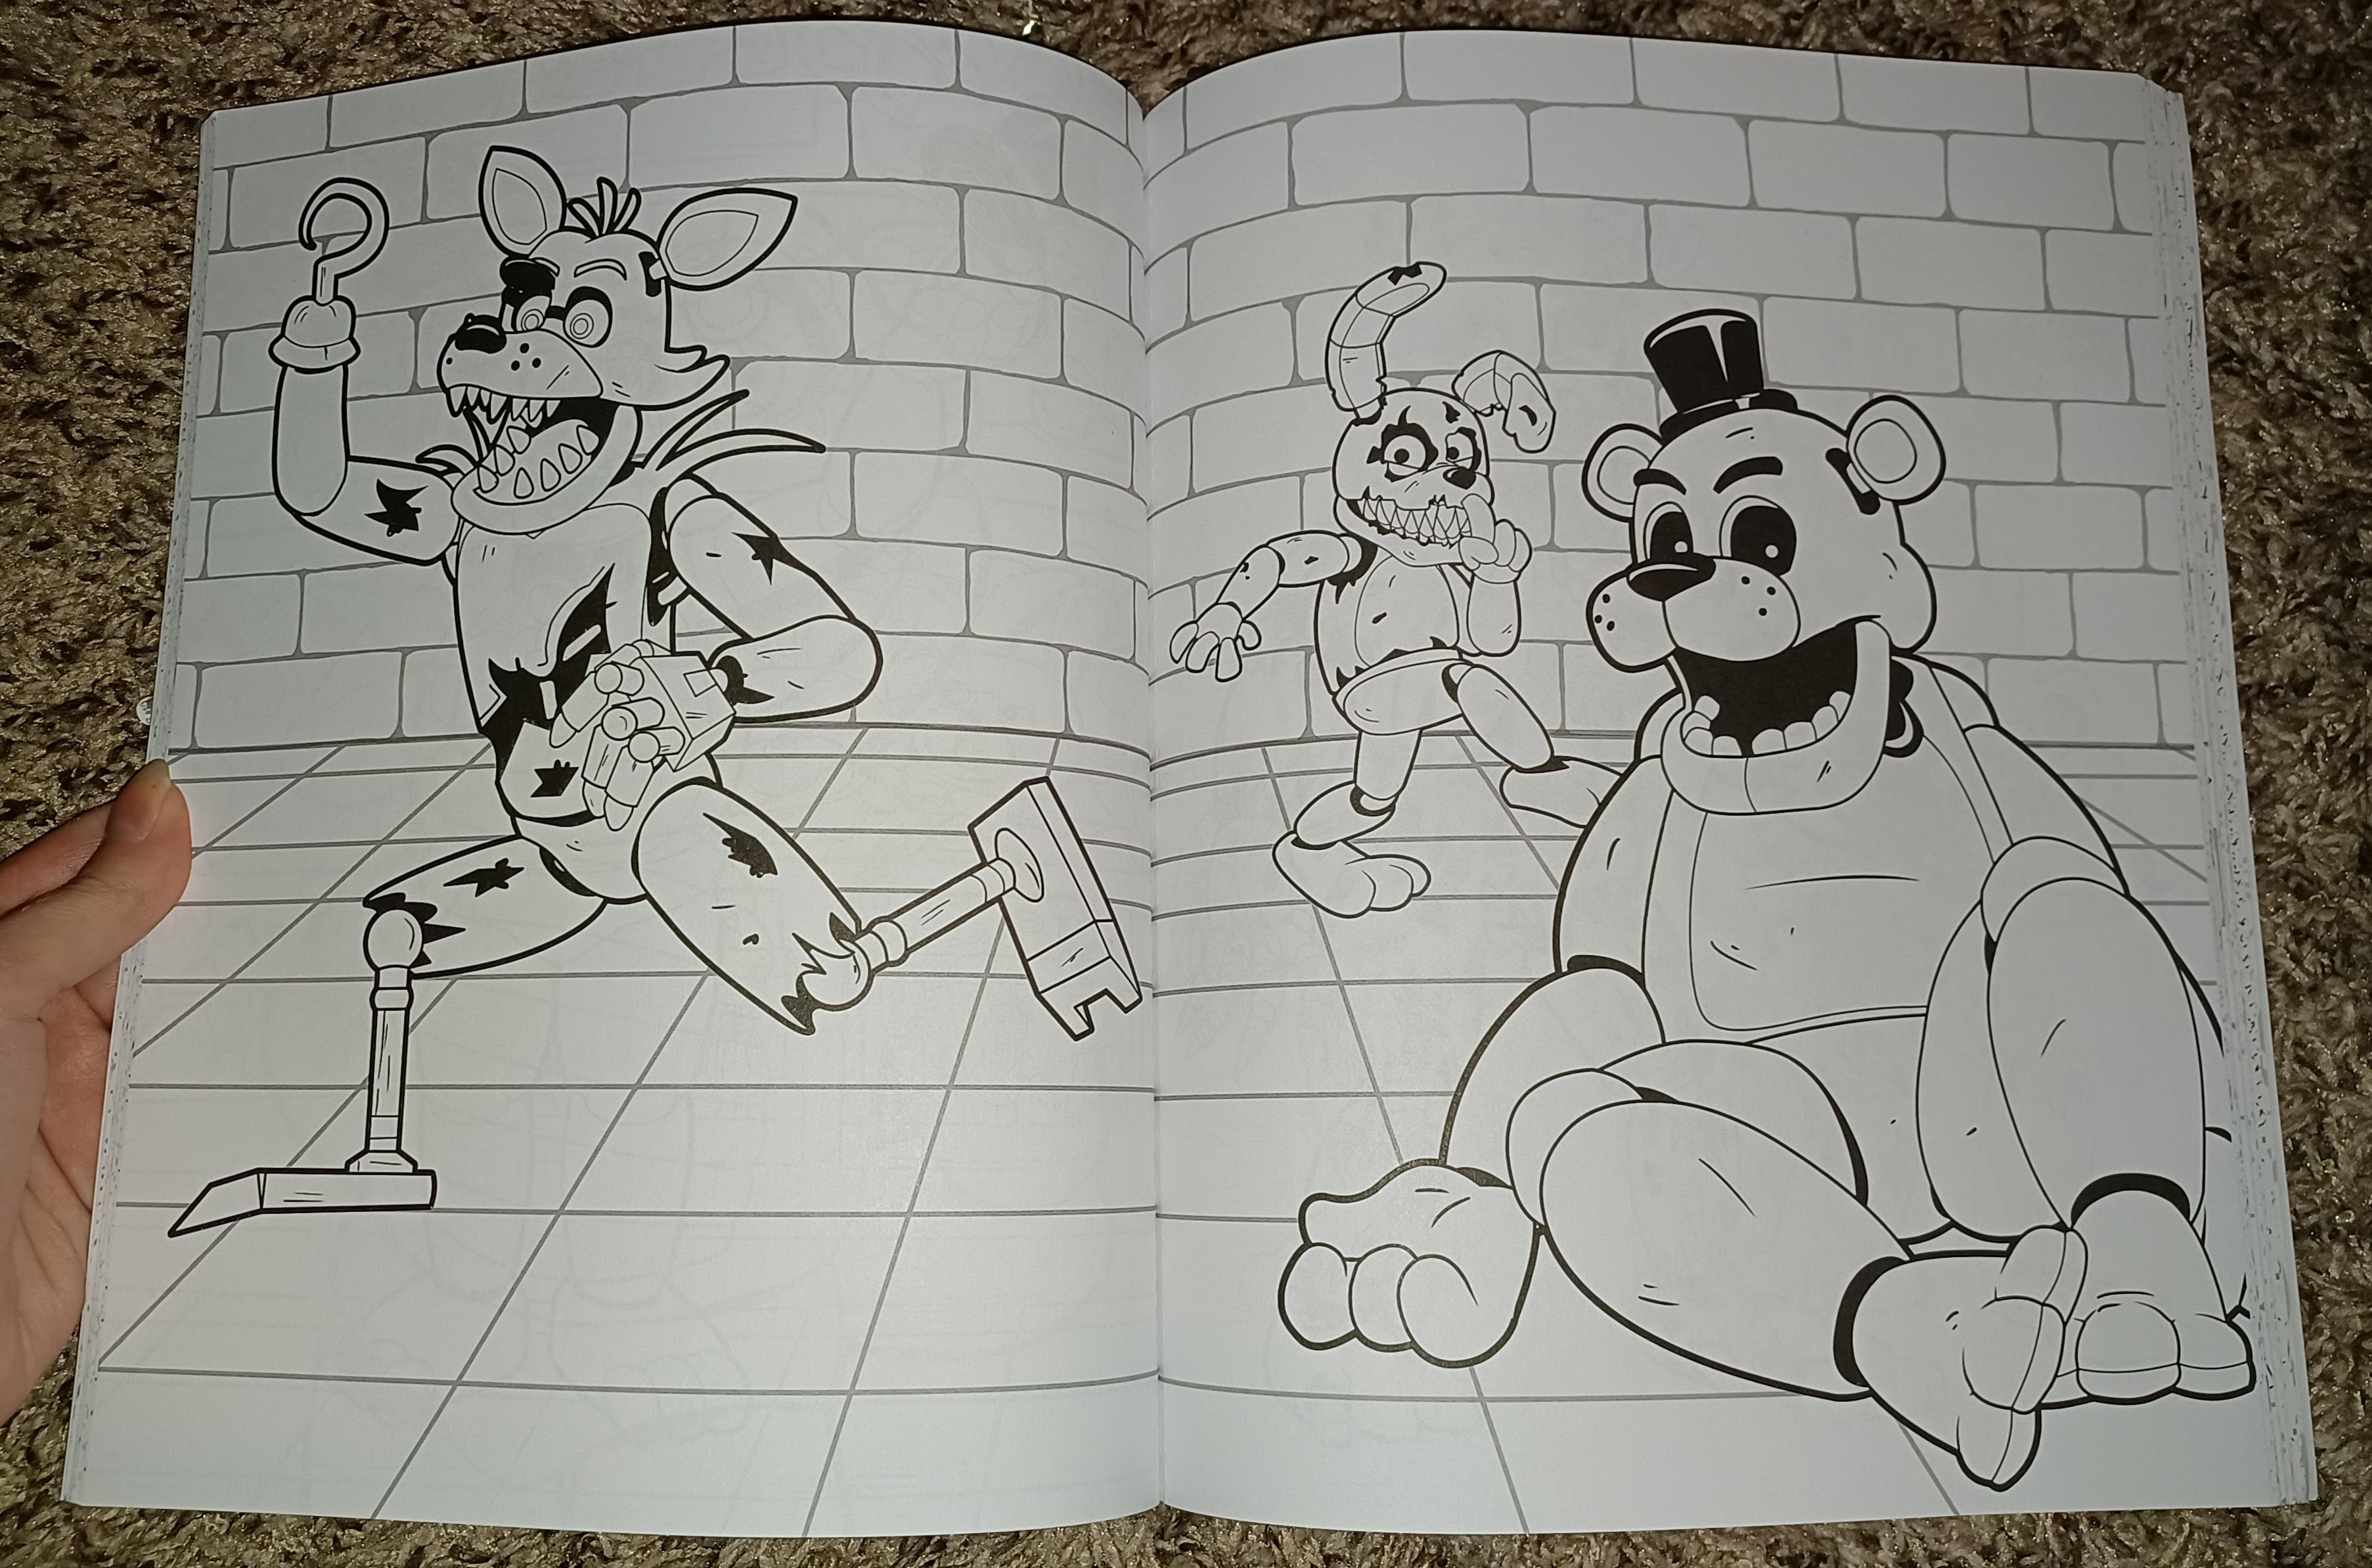 Matt yes there is lore in the coloring book rgametheorists